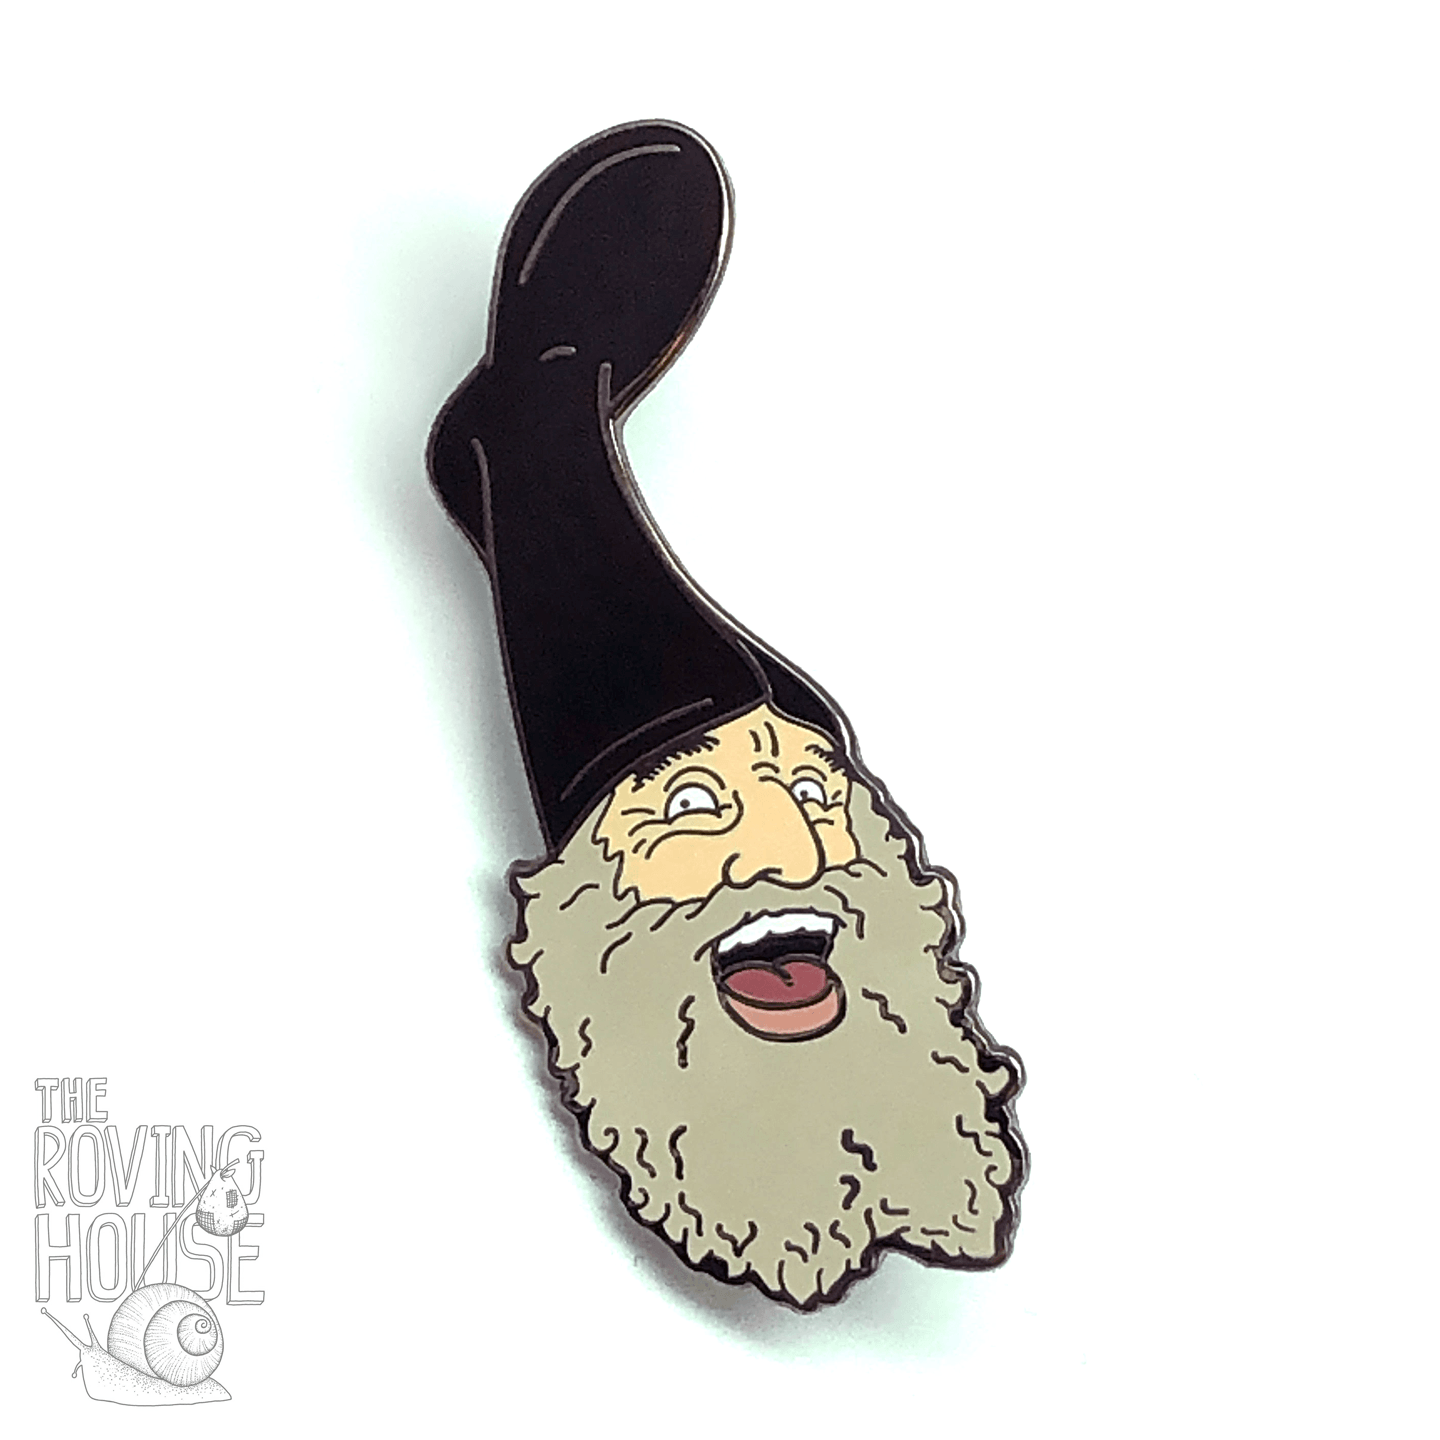 An enamel pin resembling Vermin Supreme, the bearded man with a boot on his head.